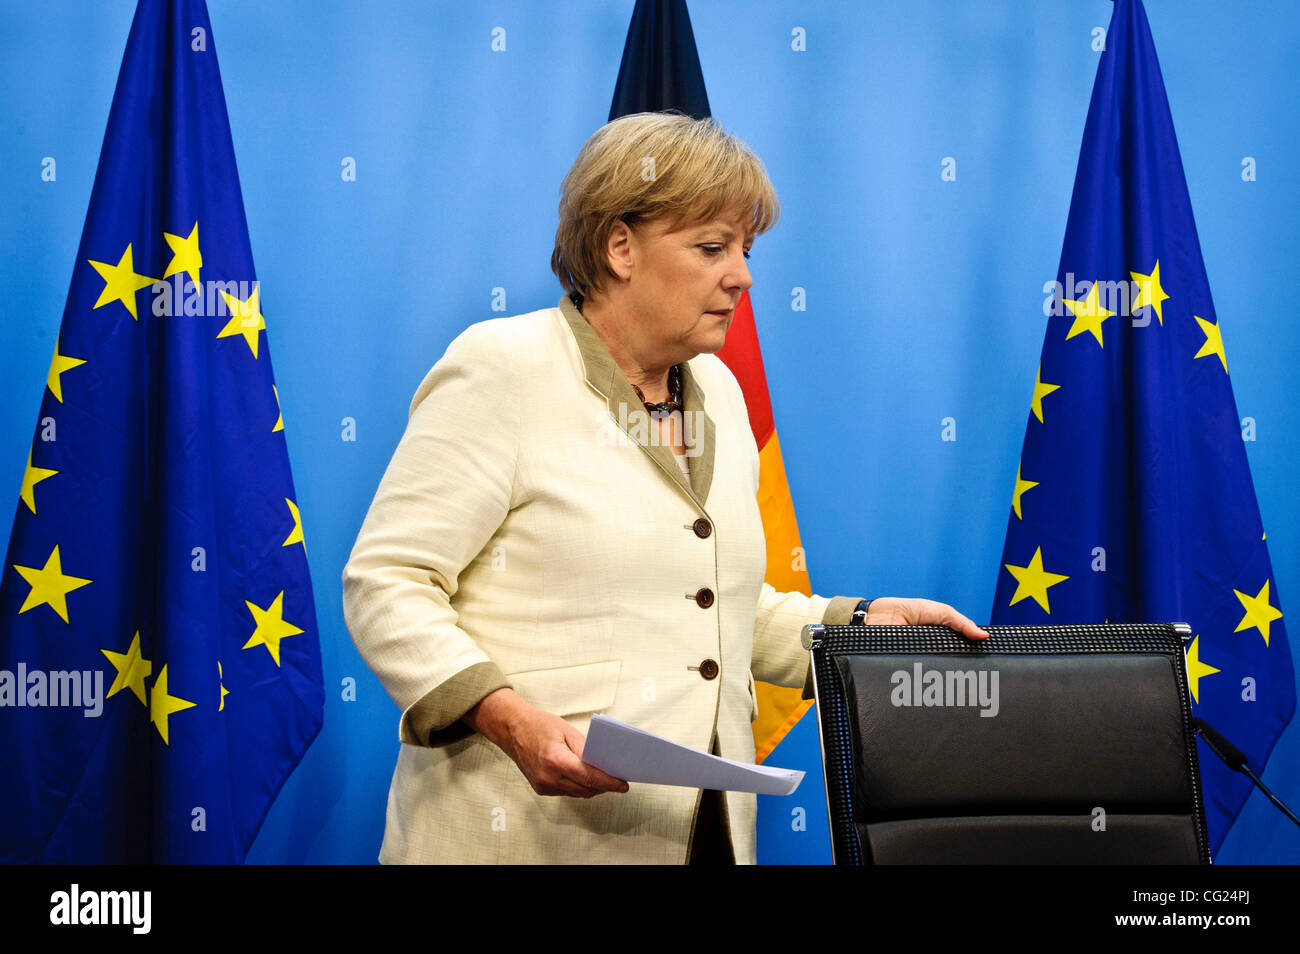 July 21, 2011 - Brussels, BXL, Belgium - Germany's Chancellor Angela Merkel   during a news conference at the European Council building at the end of an euro zone leaders crisis summit   in  Brussels, Belgium on 2011-07-21     by Wiktor Dabkowski (Credit Image: © Wiktor Dabkowski/ZUMAPRESS.com) Stock Photo